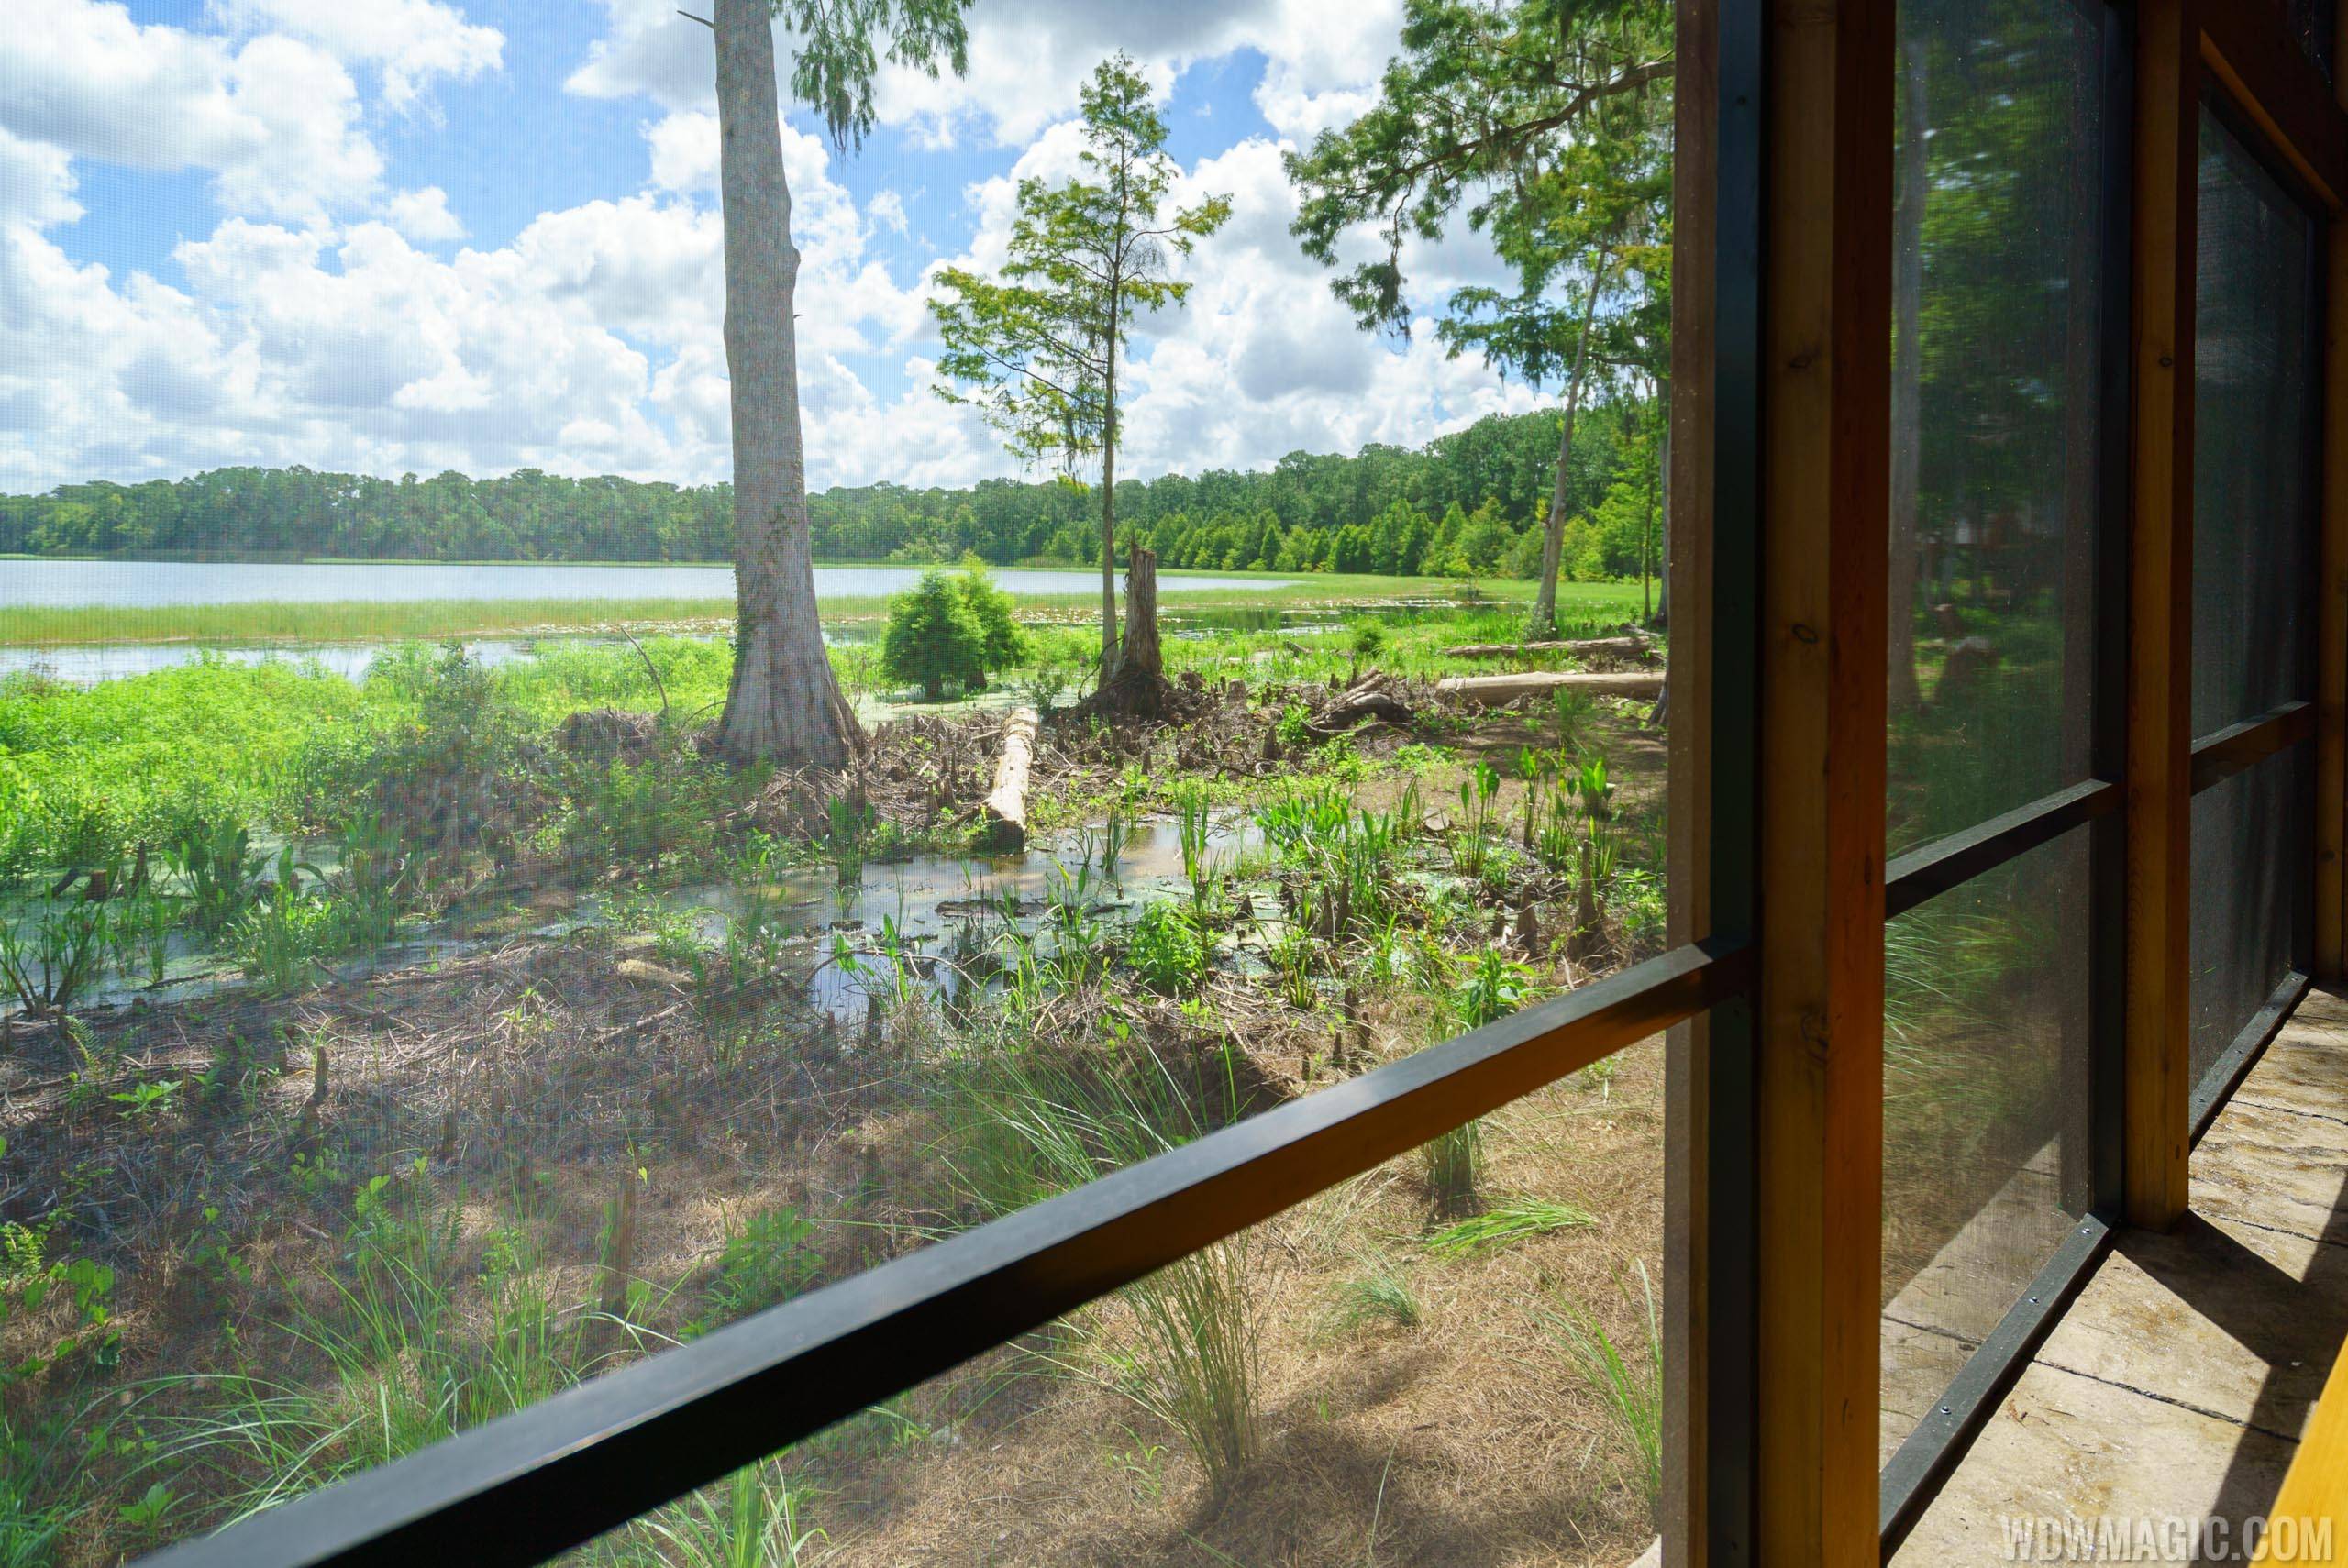 Tour of Copper Creek Villas and Cabins at Disney's Wilderness Lodge